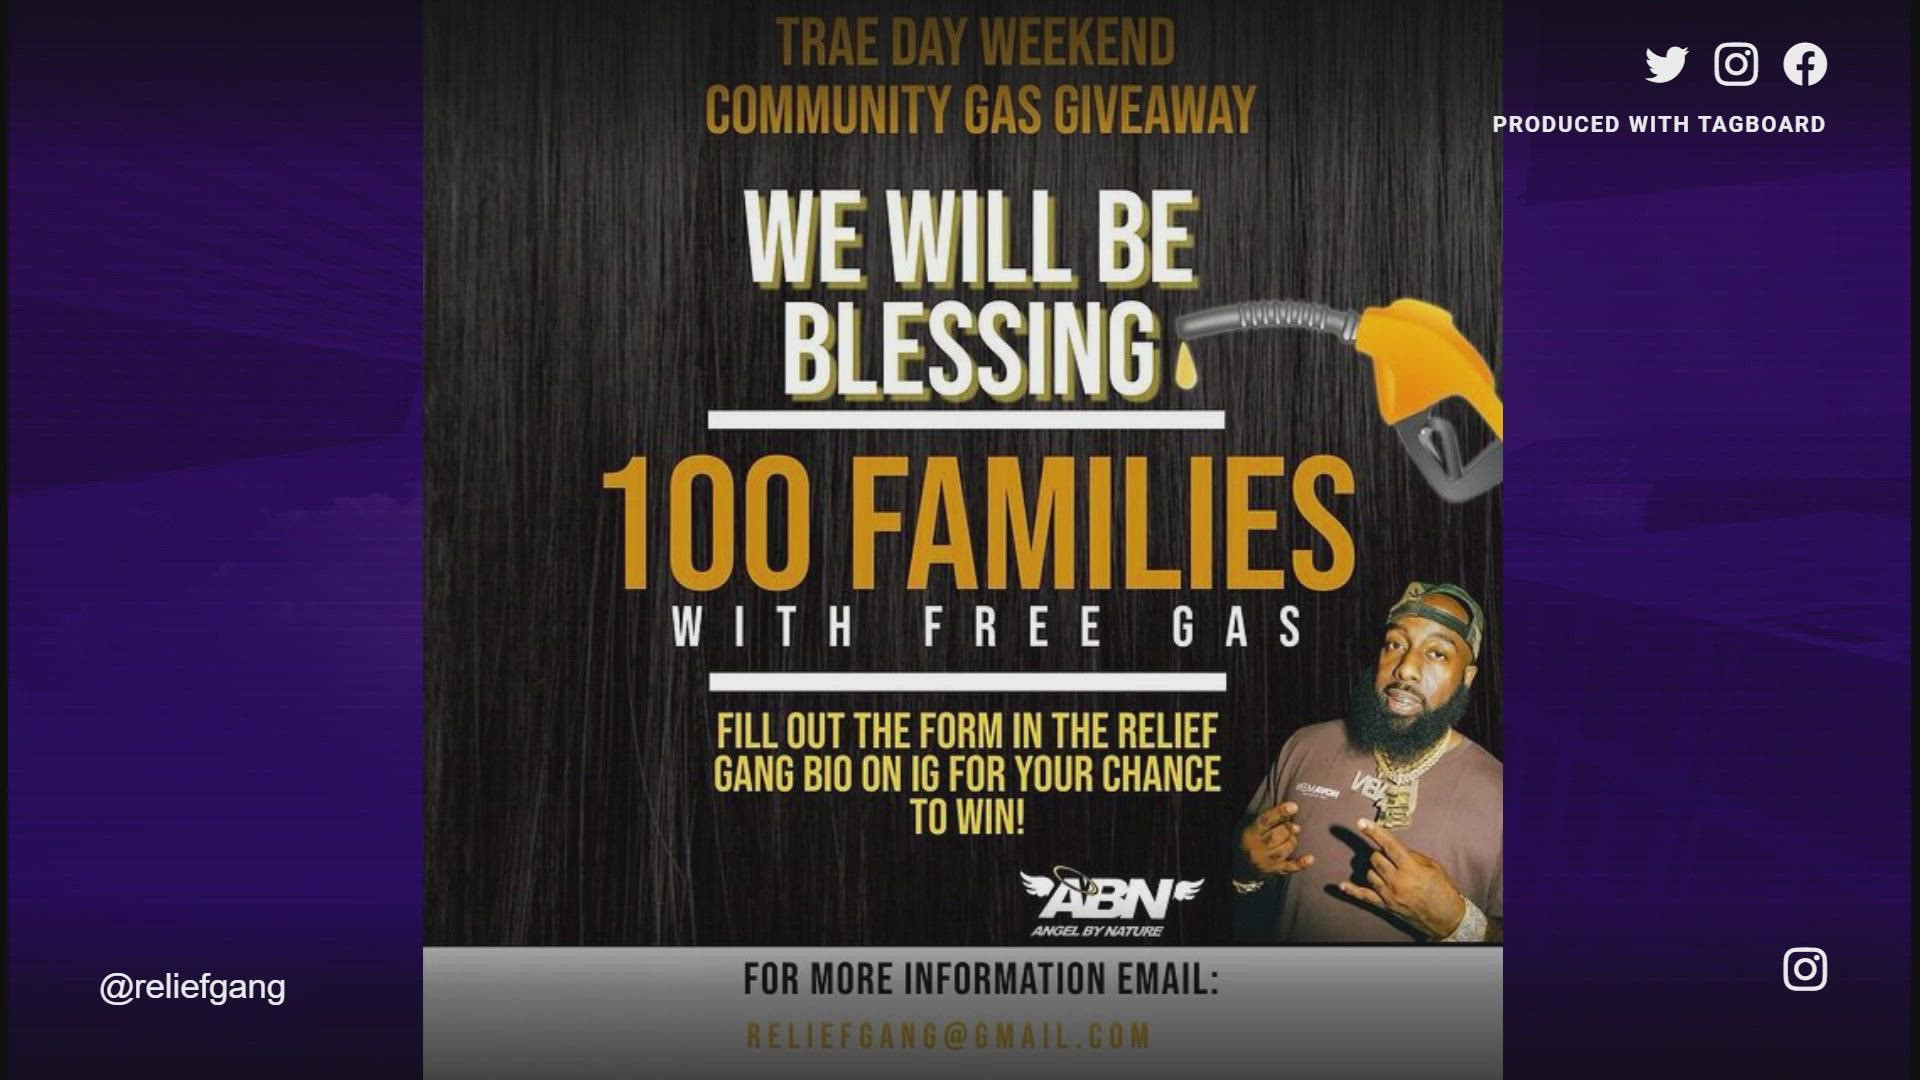 Houston artist, activist and philanthropist Trae tha Truth is hosting a gas giveaway during his "Trae Day Weekend" with his nonprofit organization, Relief Gang.